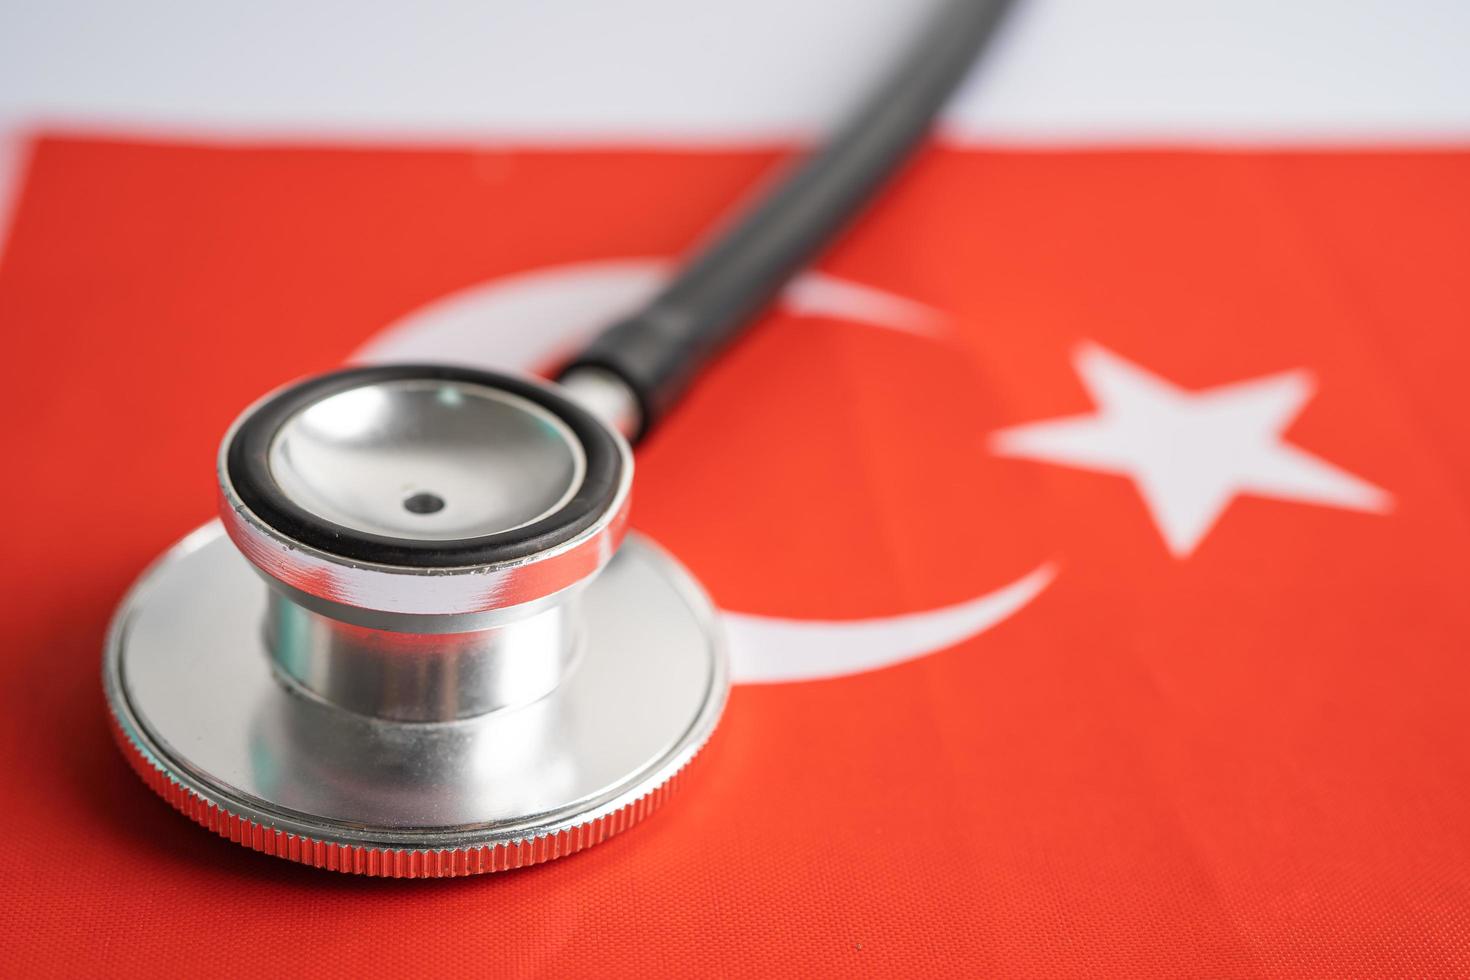 Black stethoscope on Turkey flag background, Business and finance concept. photo